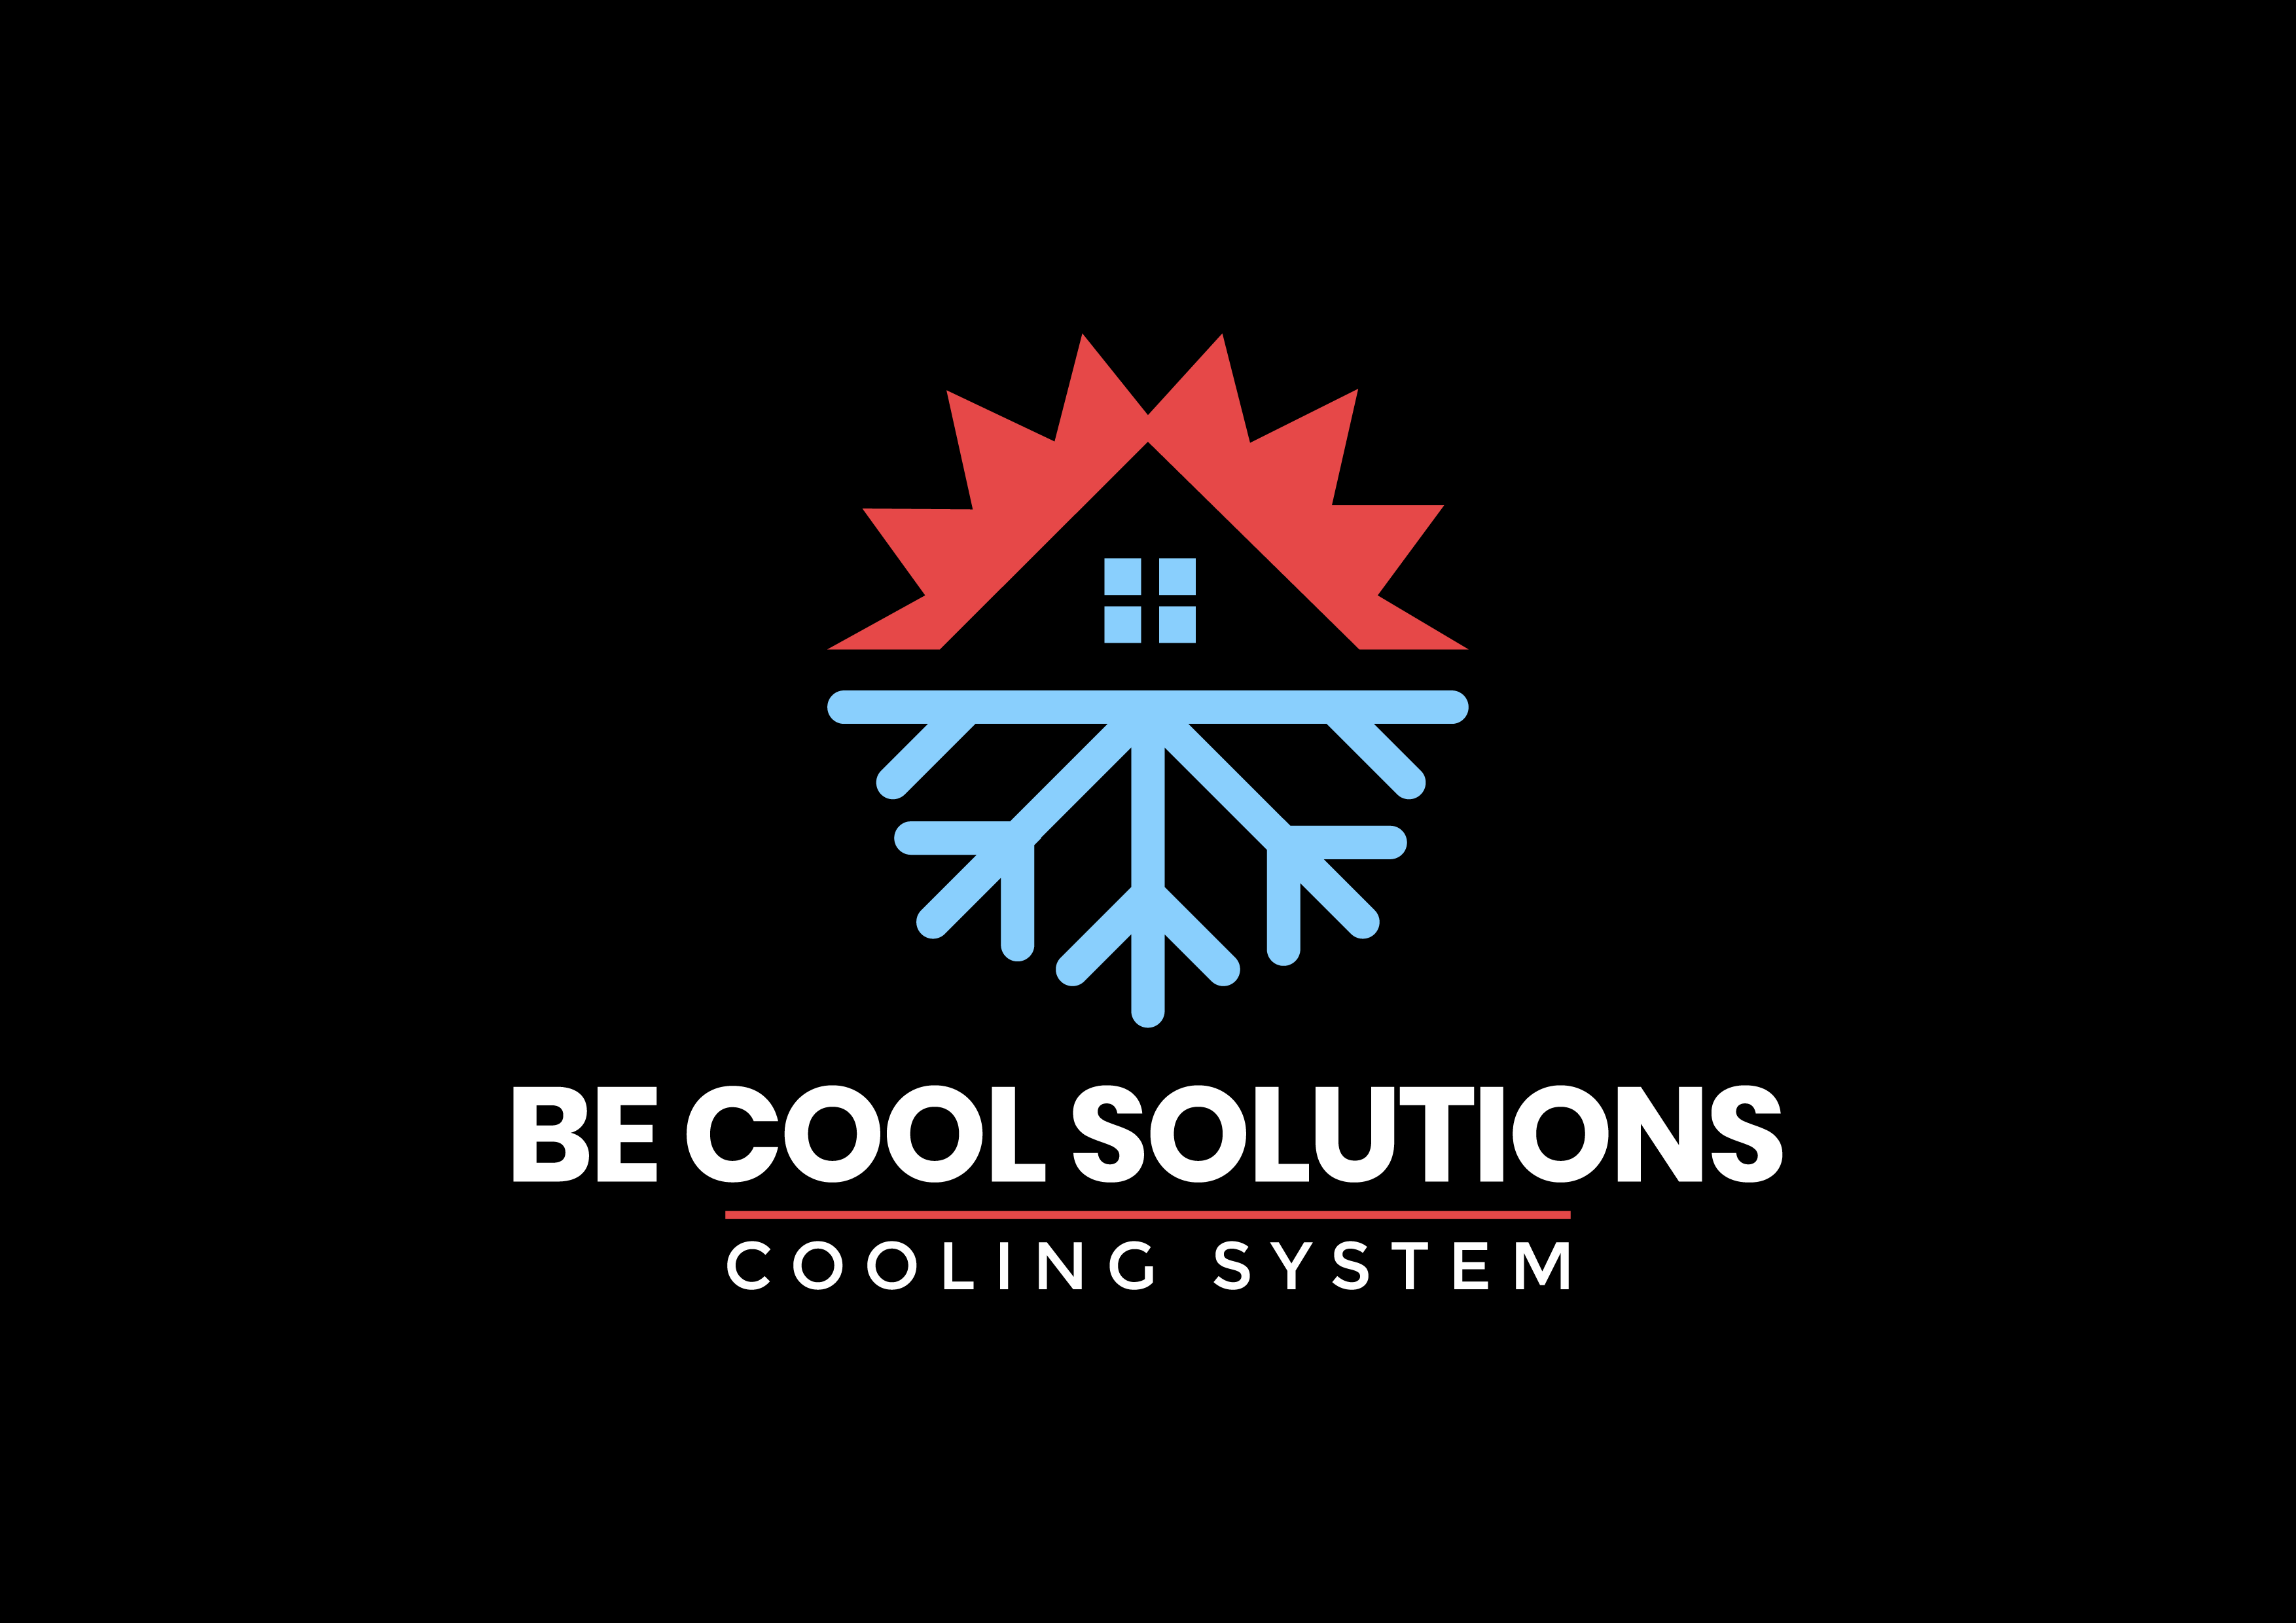 installateurs van airconditioning Sint-Stevens-Woluwe Be Cool Solutions